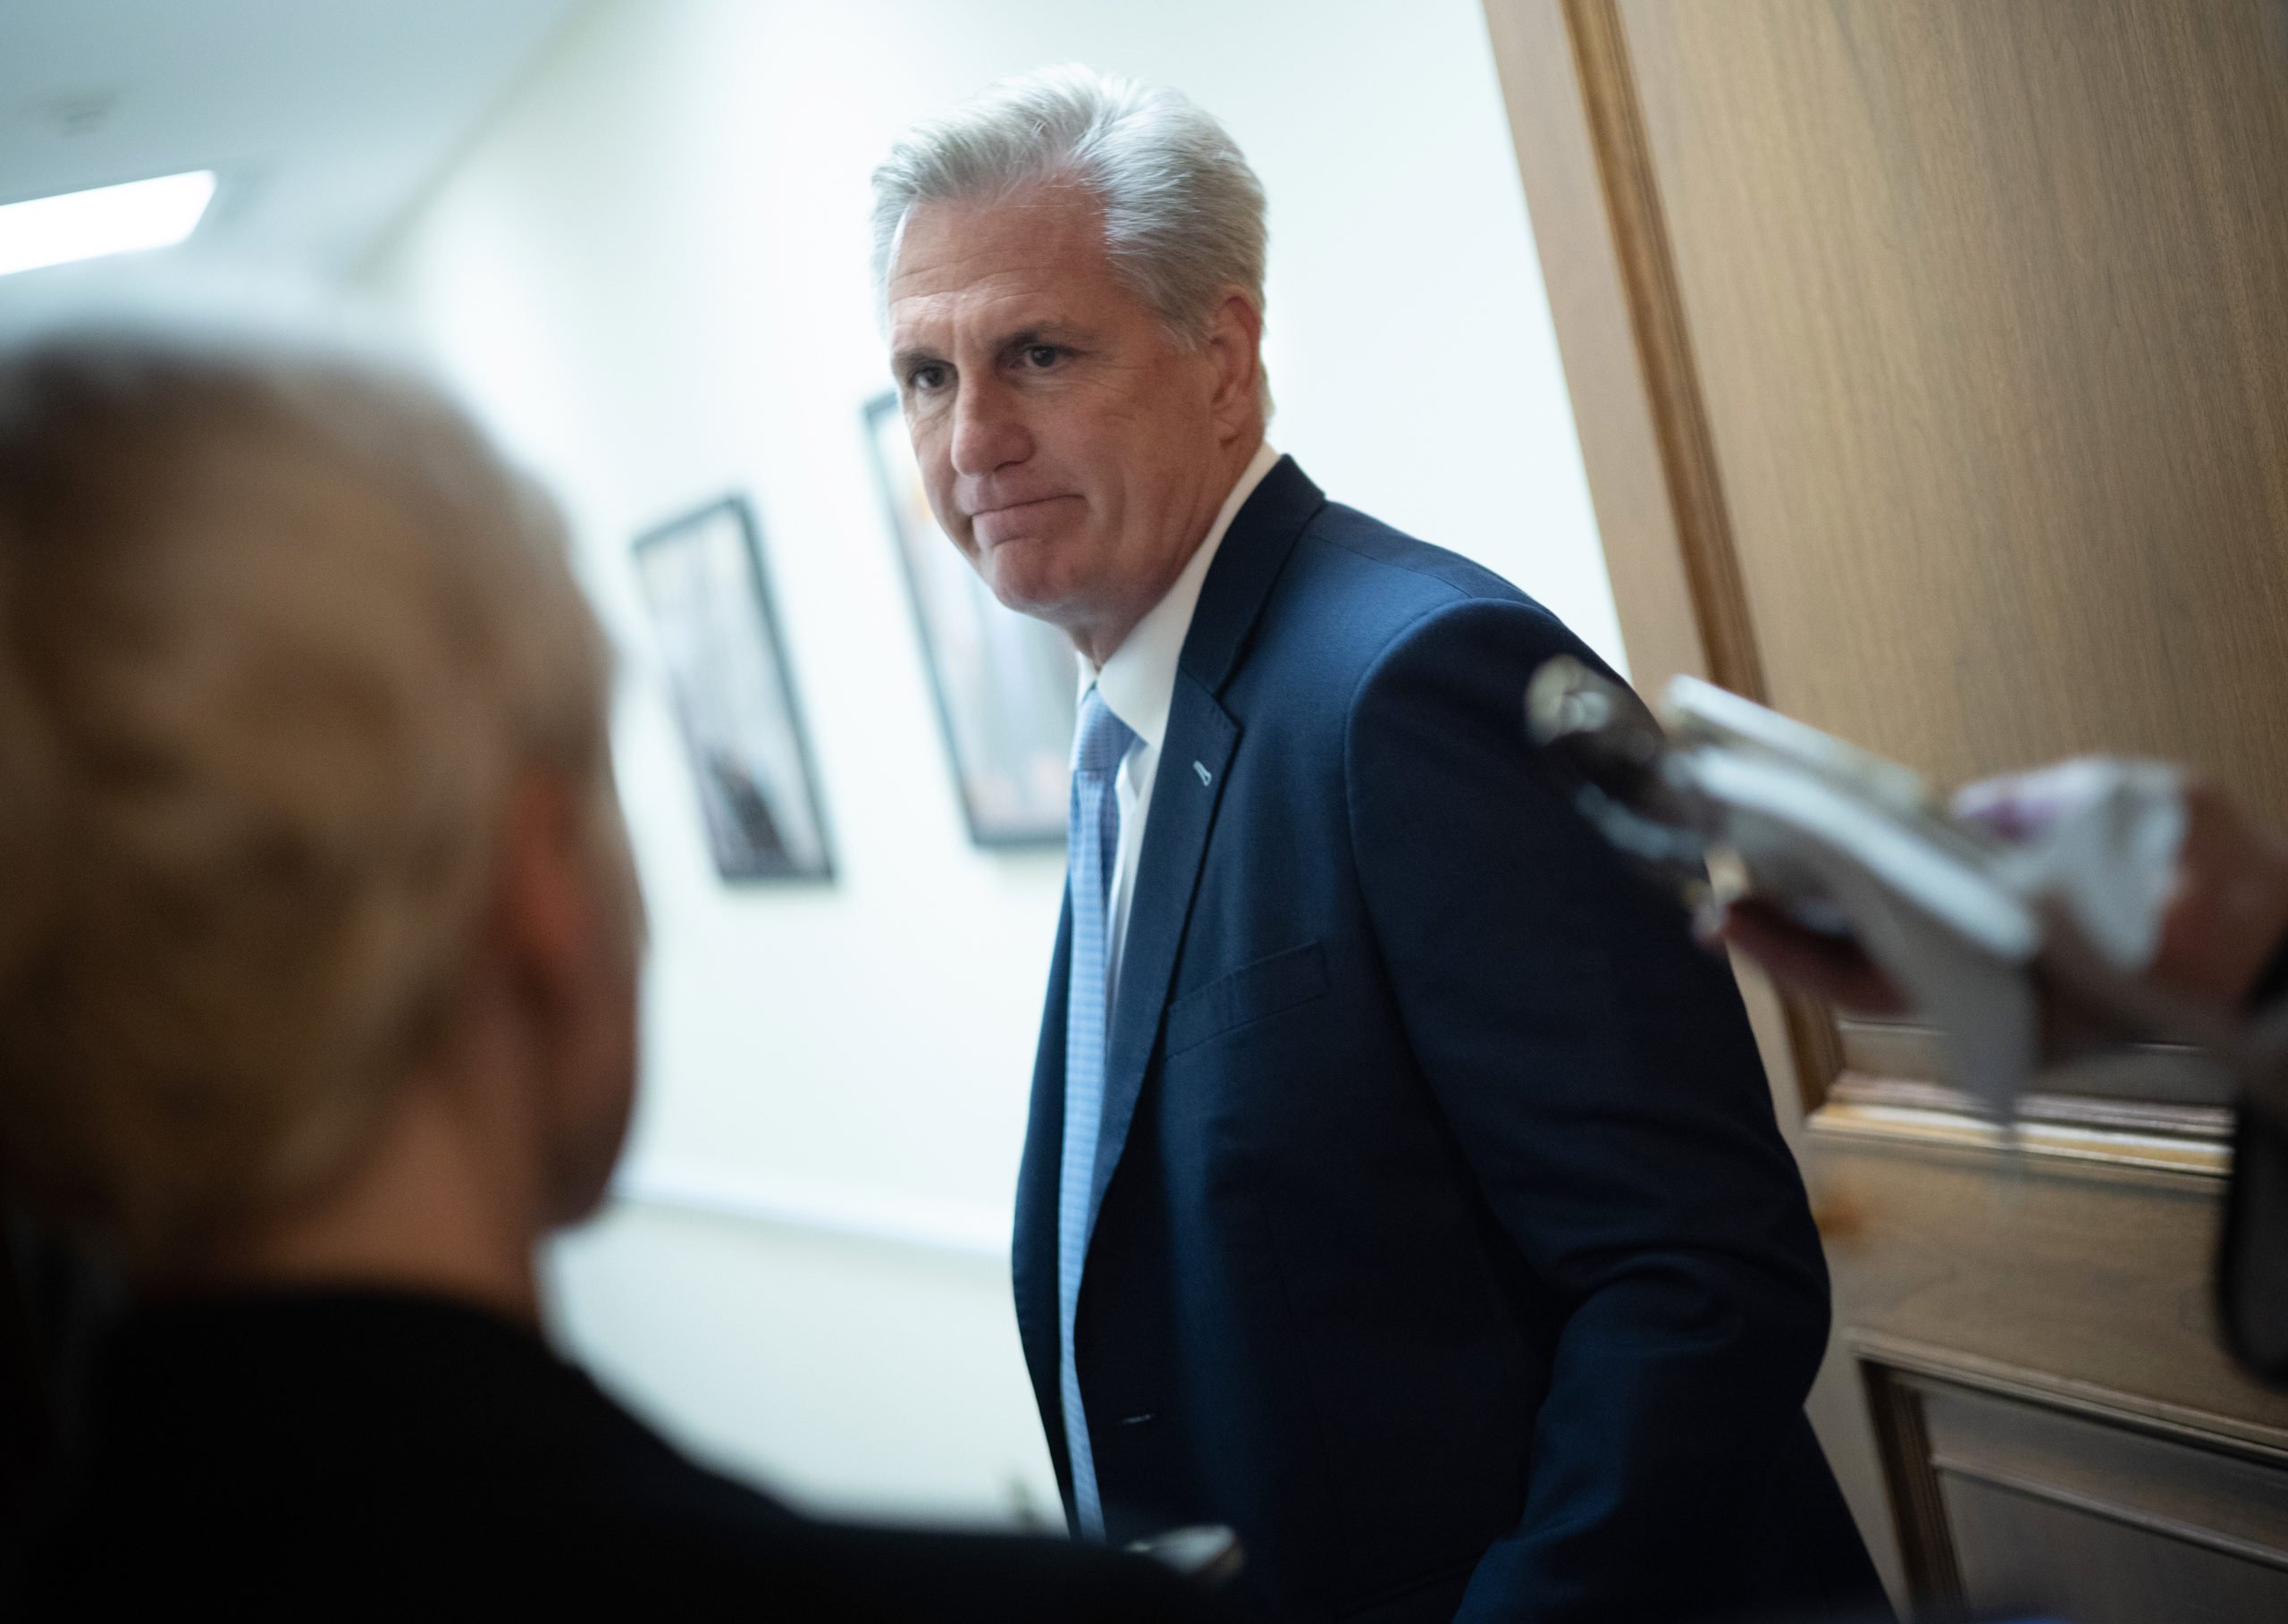 House Minority Leader Kevin McCarthy speaks before a vote on the establishment of a commission to investigate the events of January 6 on May 19, 2021. (Win McNamee/Getty Images)